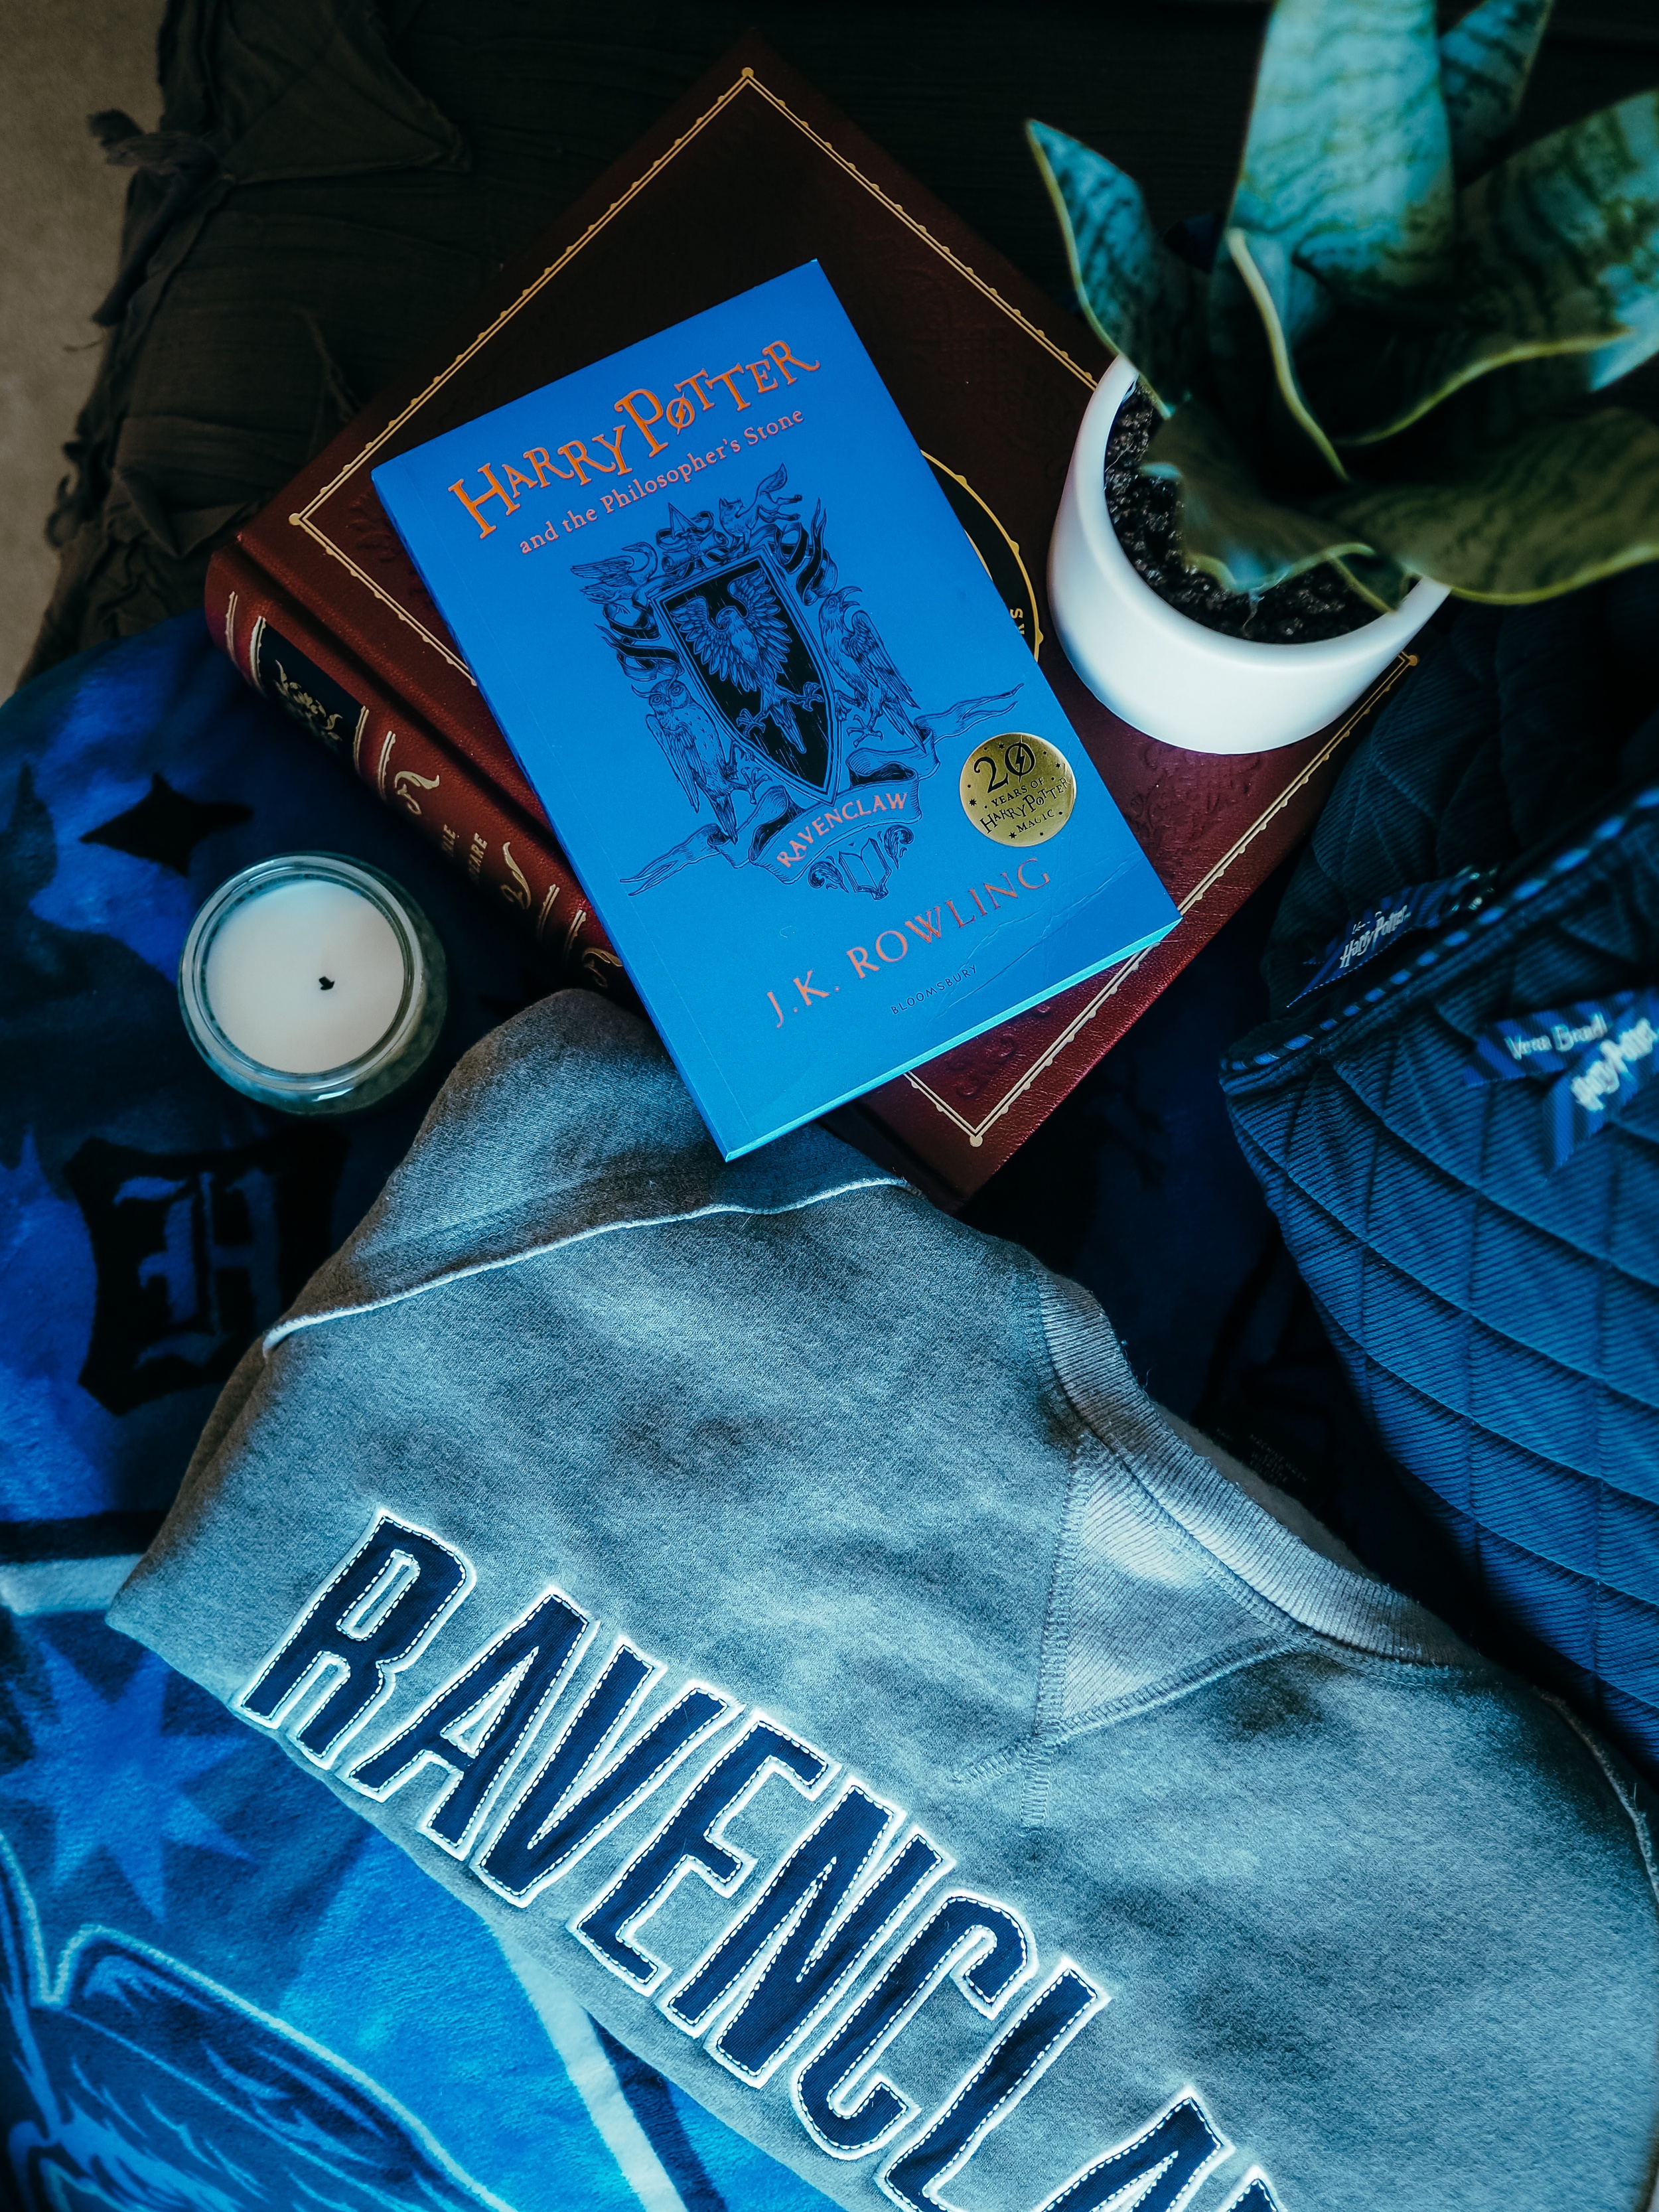 Ravenclaw aesthetic, but make it chic. Find out how to add some Ravenclaw aesthetic to your home, wardrobe, and life in this magical guide.